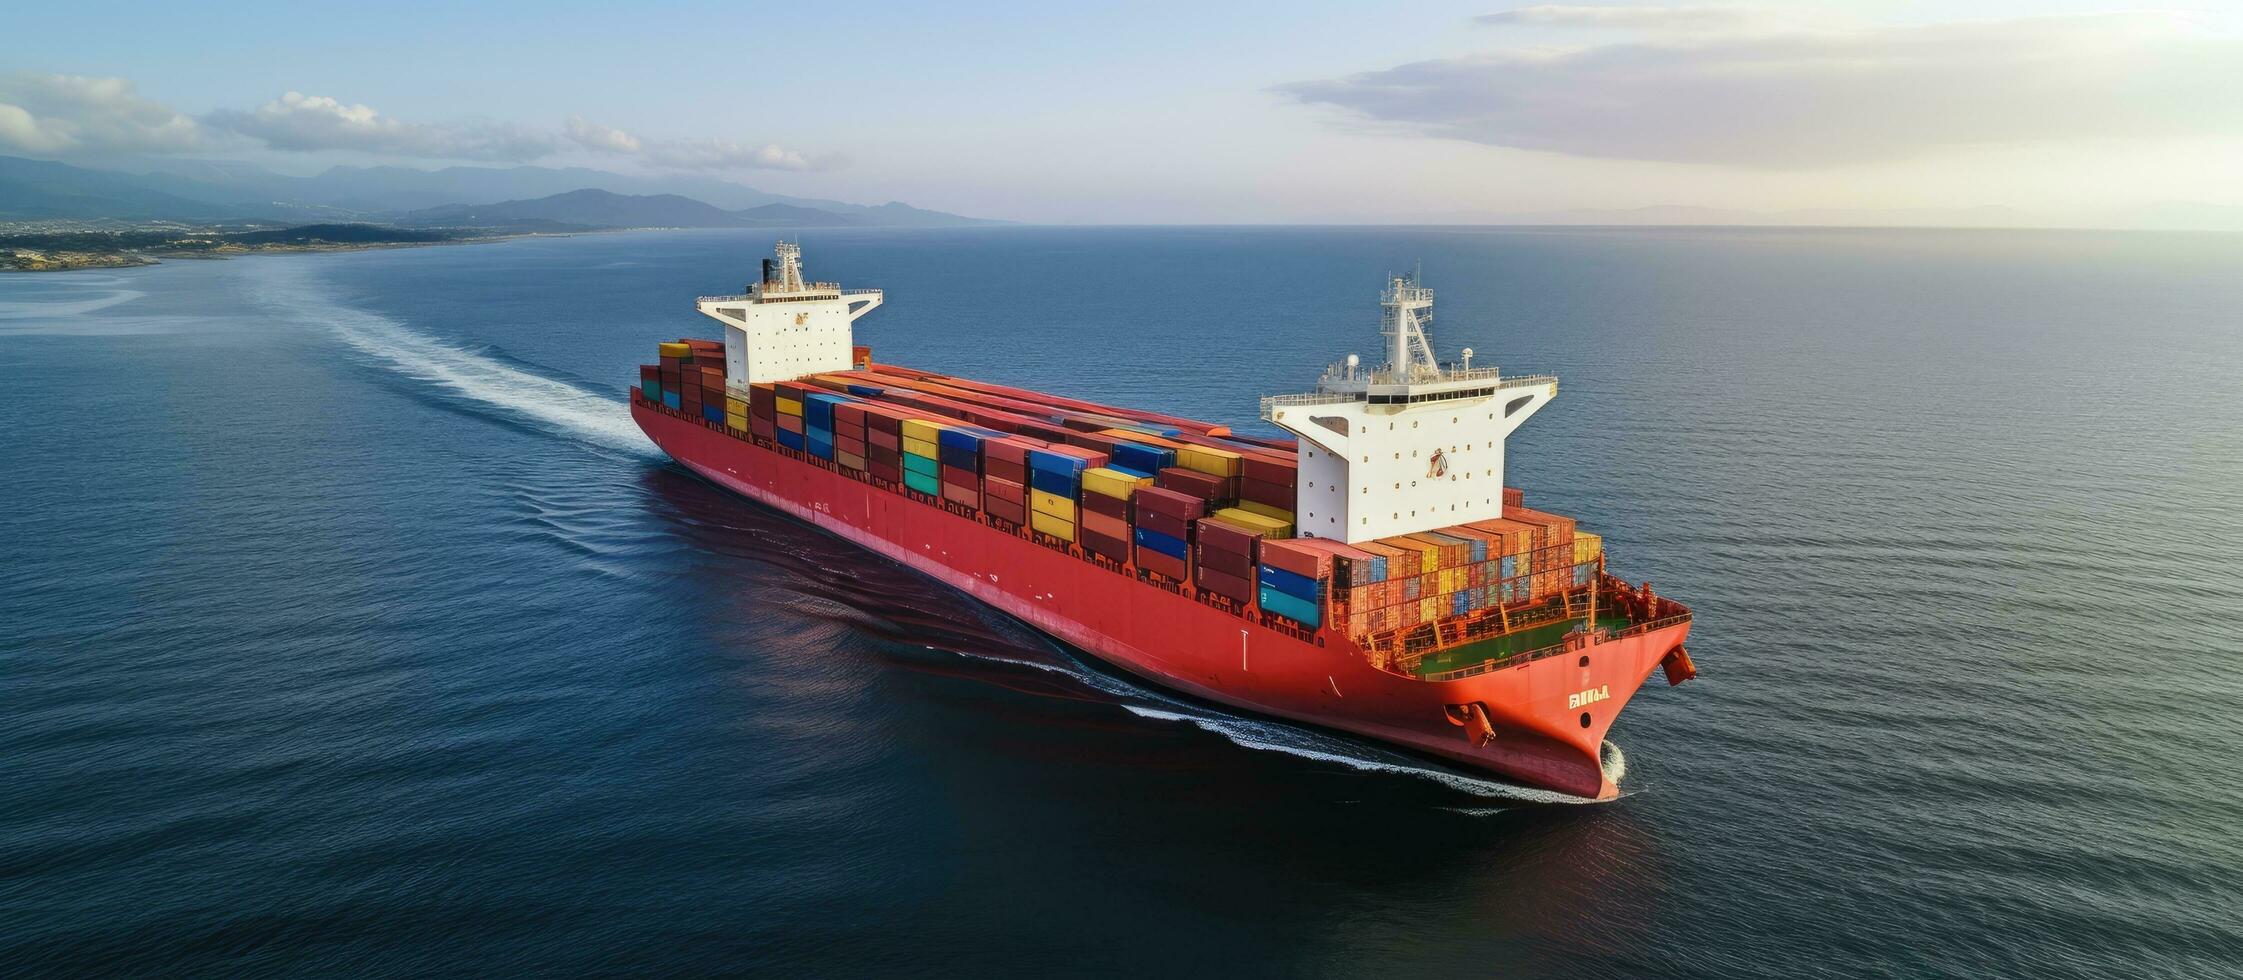 A container ship is transporting containers for import and export purposes. This business logistic photo